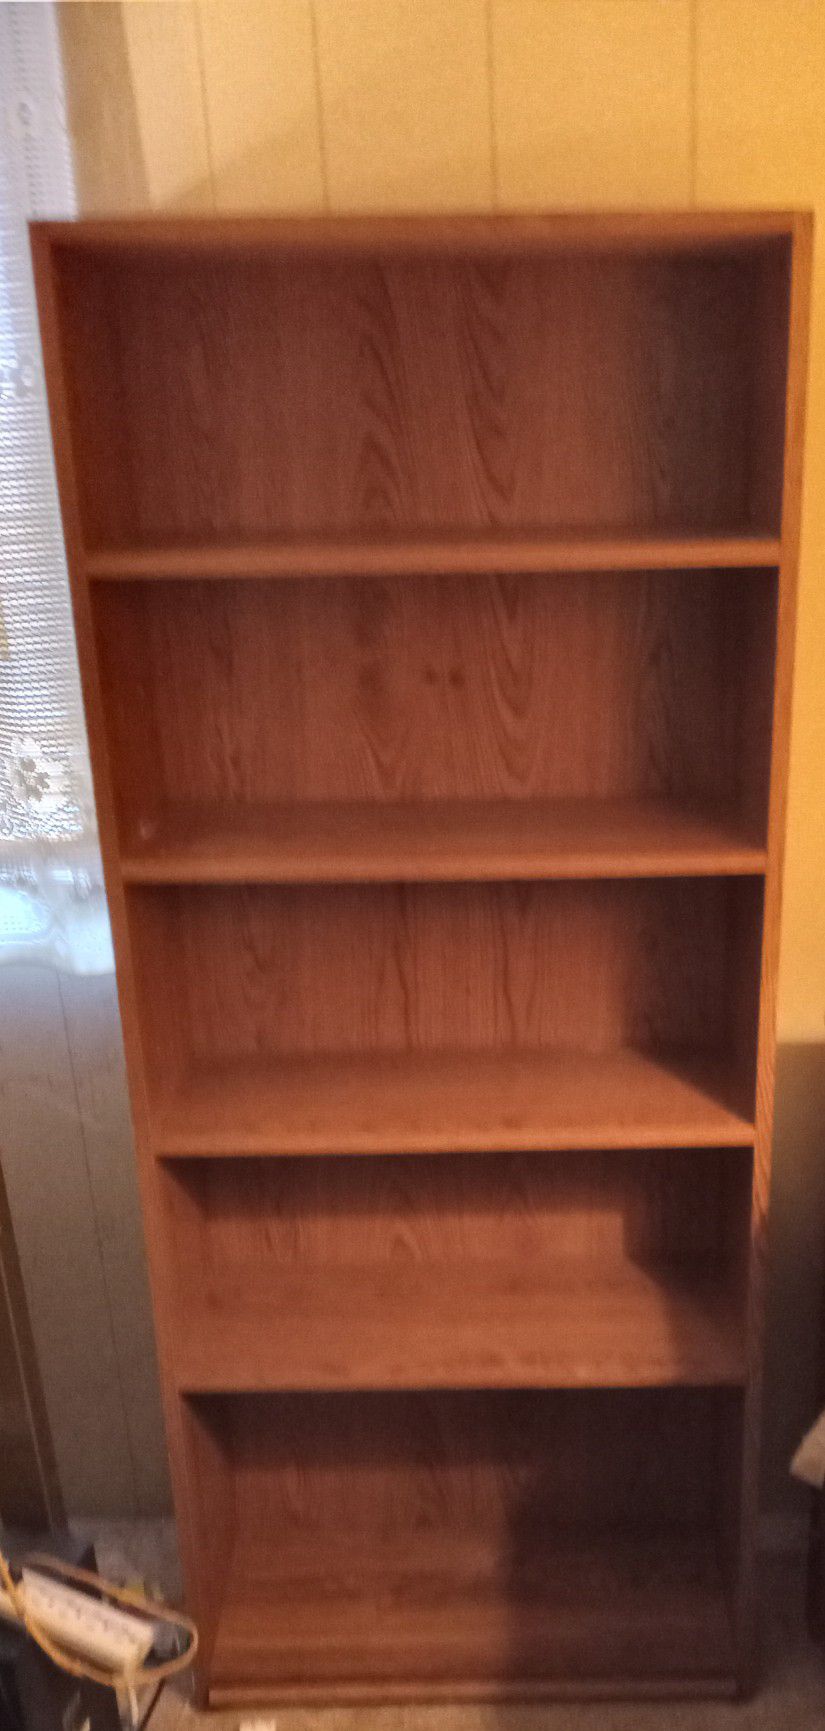 Taller Particle Board Bookcase